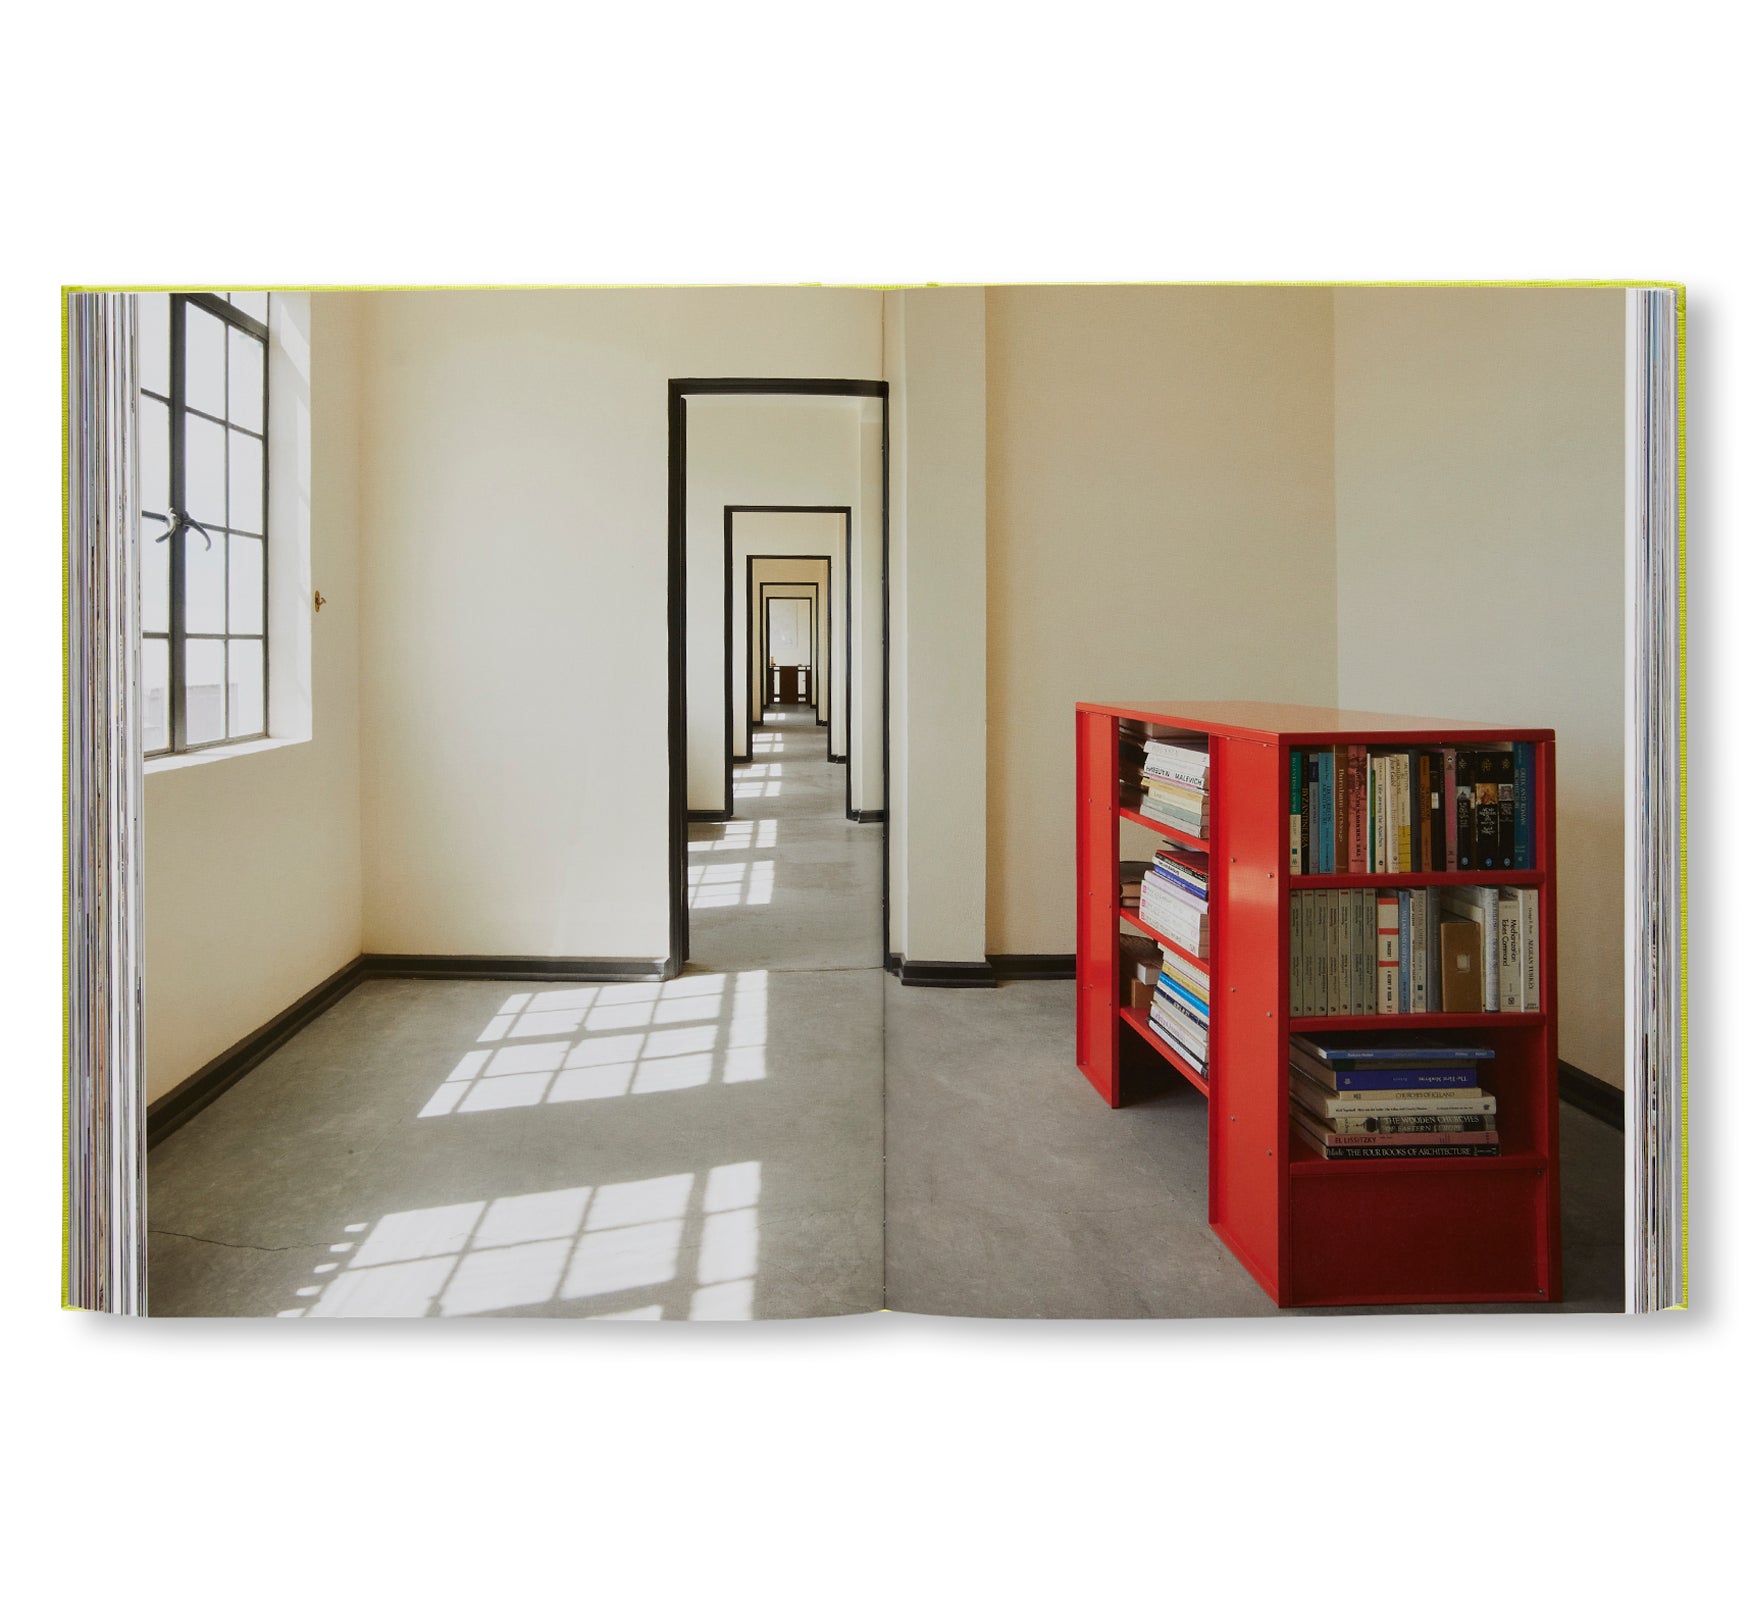 DONALD JUDD SPACES by Donald Judd